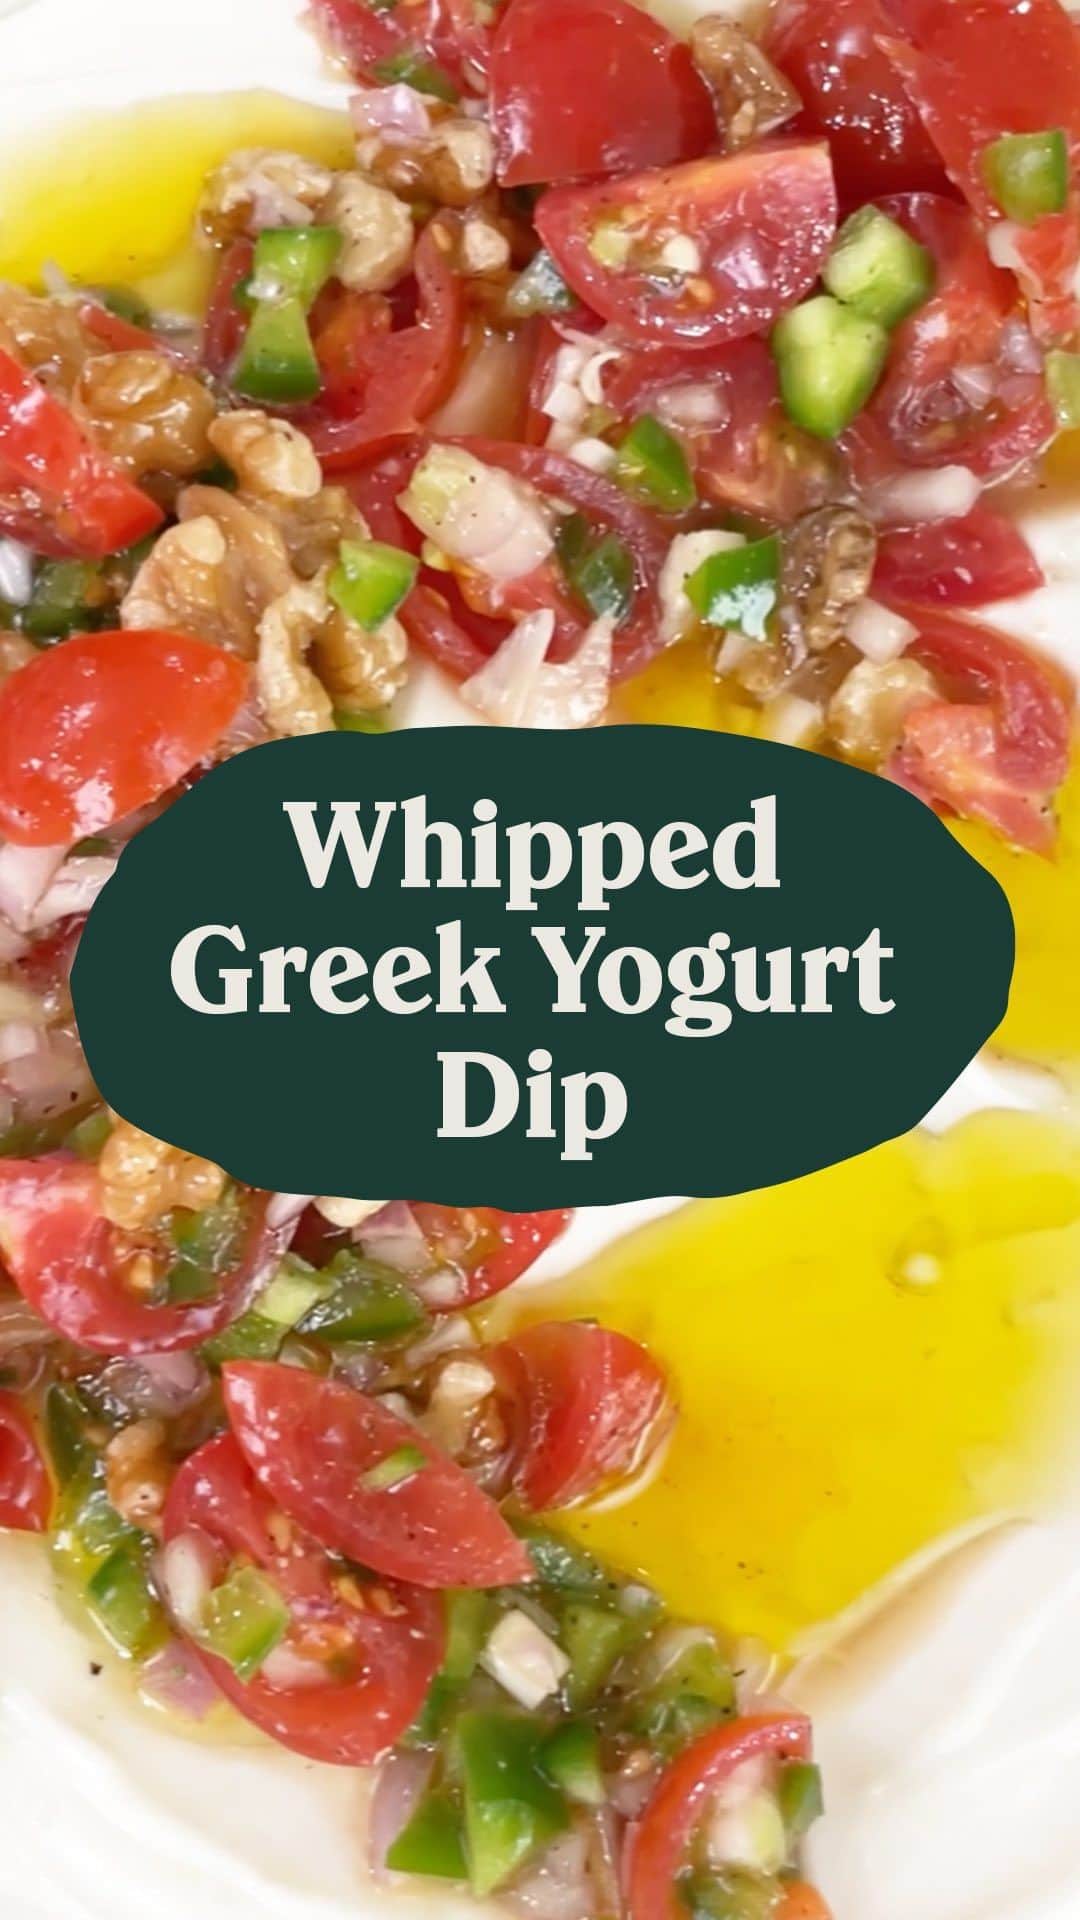 Chobaniのインスタグラム：「Let's make a Whipped Greek Yogurt Dip!  #greekyogurt #easysnack #mediterranean #easydip  🍅 Ingredients 🍅   For the dip:  • 2 cups Chobani Whole Milk Plain Greek Yogurt  • Zest of one lemon  • Kosher salt  • Extra-virgin olive oil • Pita chips, for serving  For the salsa: • 1 cup cherry tomatoes, halved  • 1 large jalapeño pepper, cored, seeded, and finely chopped  • 1 large shallot, finely chopped  • 1/3 cup roughly chopped walnuts (optional) • Black pepper • Juice of 1 lemon   🥗 Directions 🥗  1️⃣ Make the whipped yogurt dip. In a small bowl, combine the yogurt with the lemon zest and a big pinch of salt. Add a drizzle of extra virgin olive oil and whisk to combine. Taste and adjust the salt to your liking.  2️⃣ Make the salsa. In another bowl, combine the tomatoes, jalapeño pepper, shallots, and walnuts (if using). Season with a big pinch of kosher salt and black pepper. Add the lemon juice and a drizzle of extra virgin olive oil. Toss to combine. Taste and adjust the seasoning to your liking.  3️⃣ Assemble the dip. Spread the whipped yogurt dip on a serving plate. Add a drizzle of extra virgin olive oil, then spoon the salsa on top. Serve with pita chips.   Recipe by: @themediterraneandish」